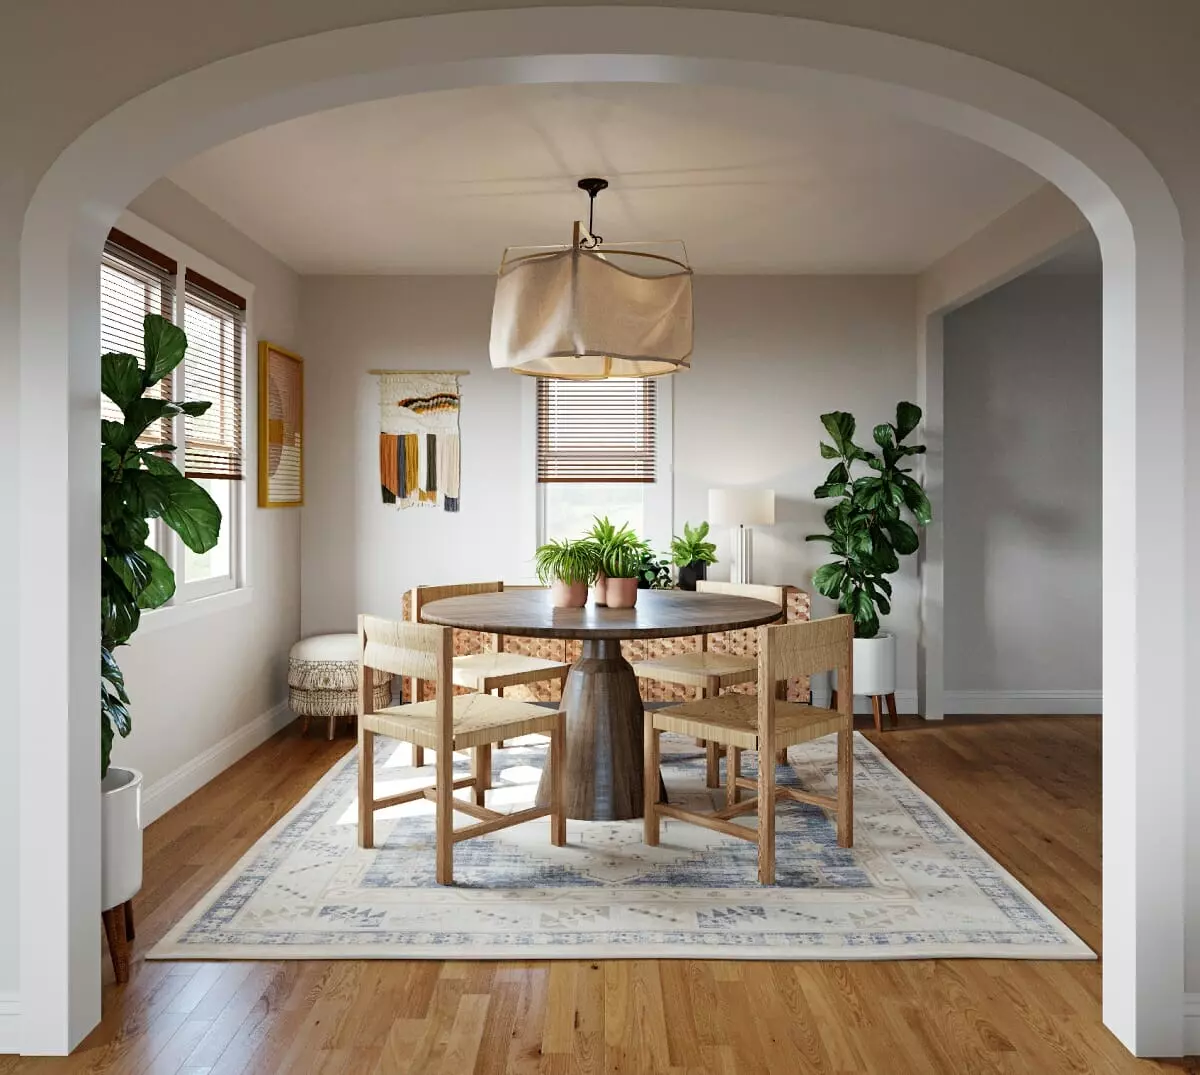 Home décor trends 2023 in a dining room by Decorilla designer, Drew F.